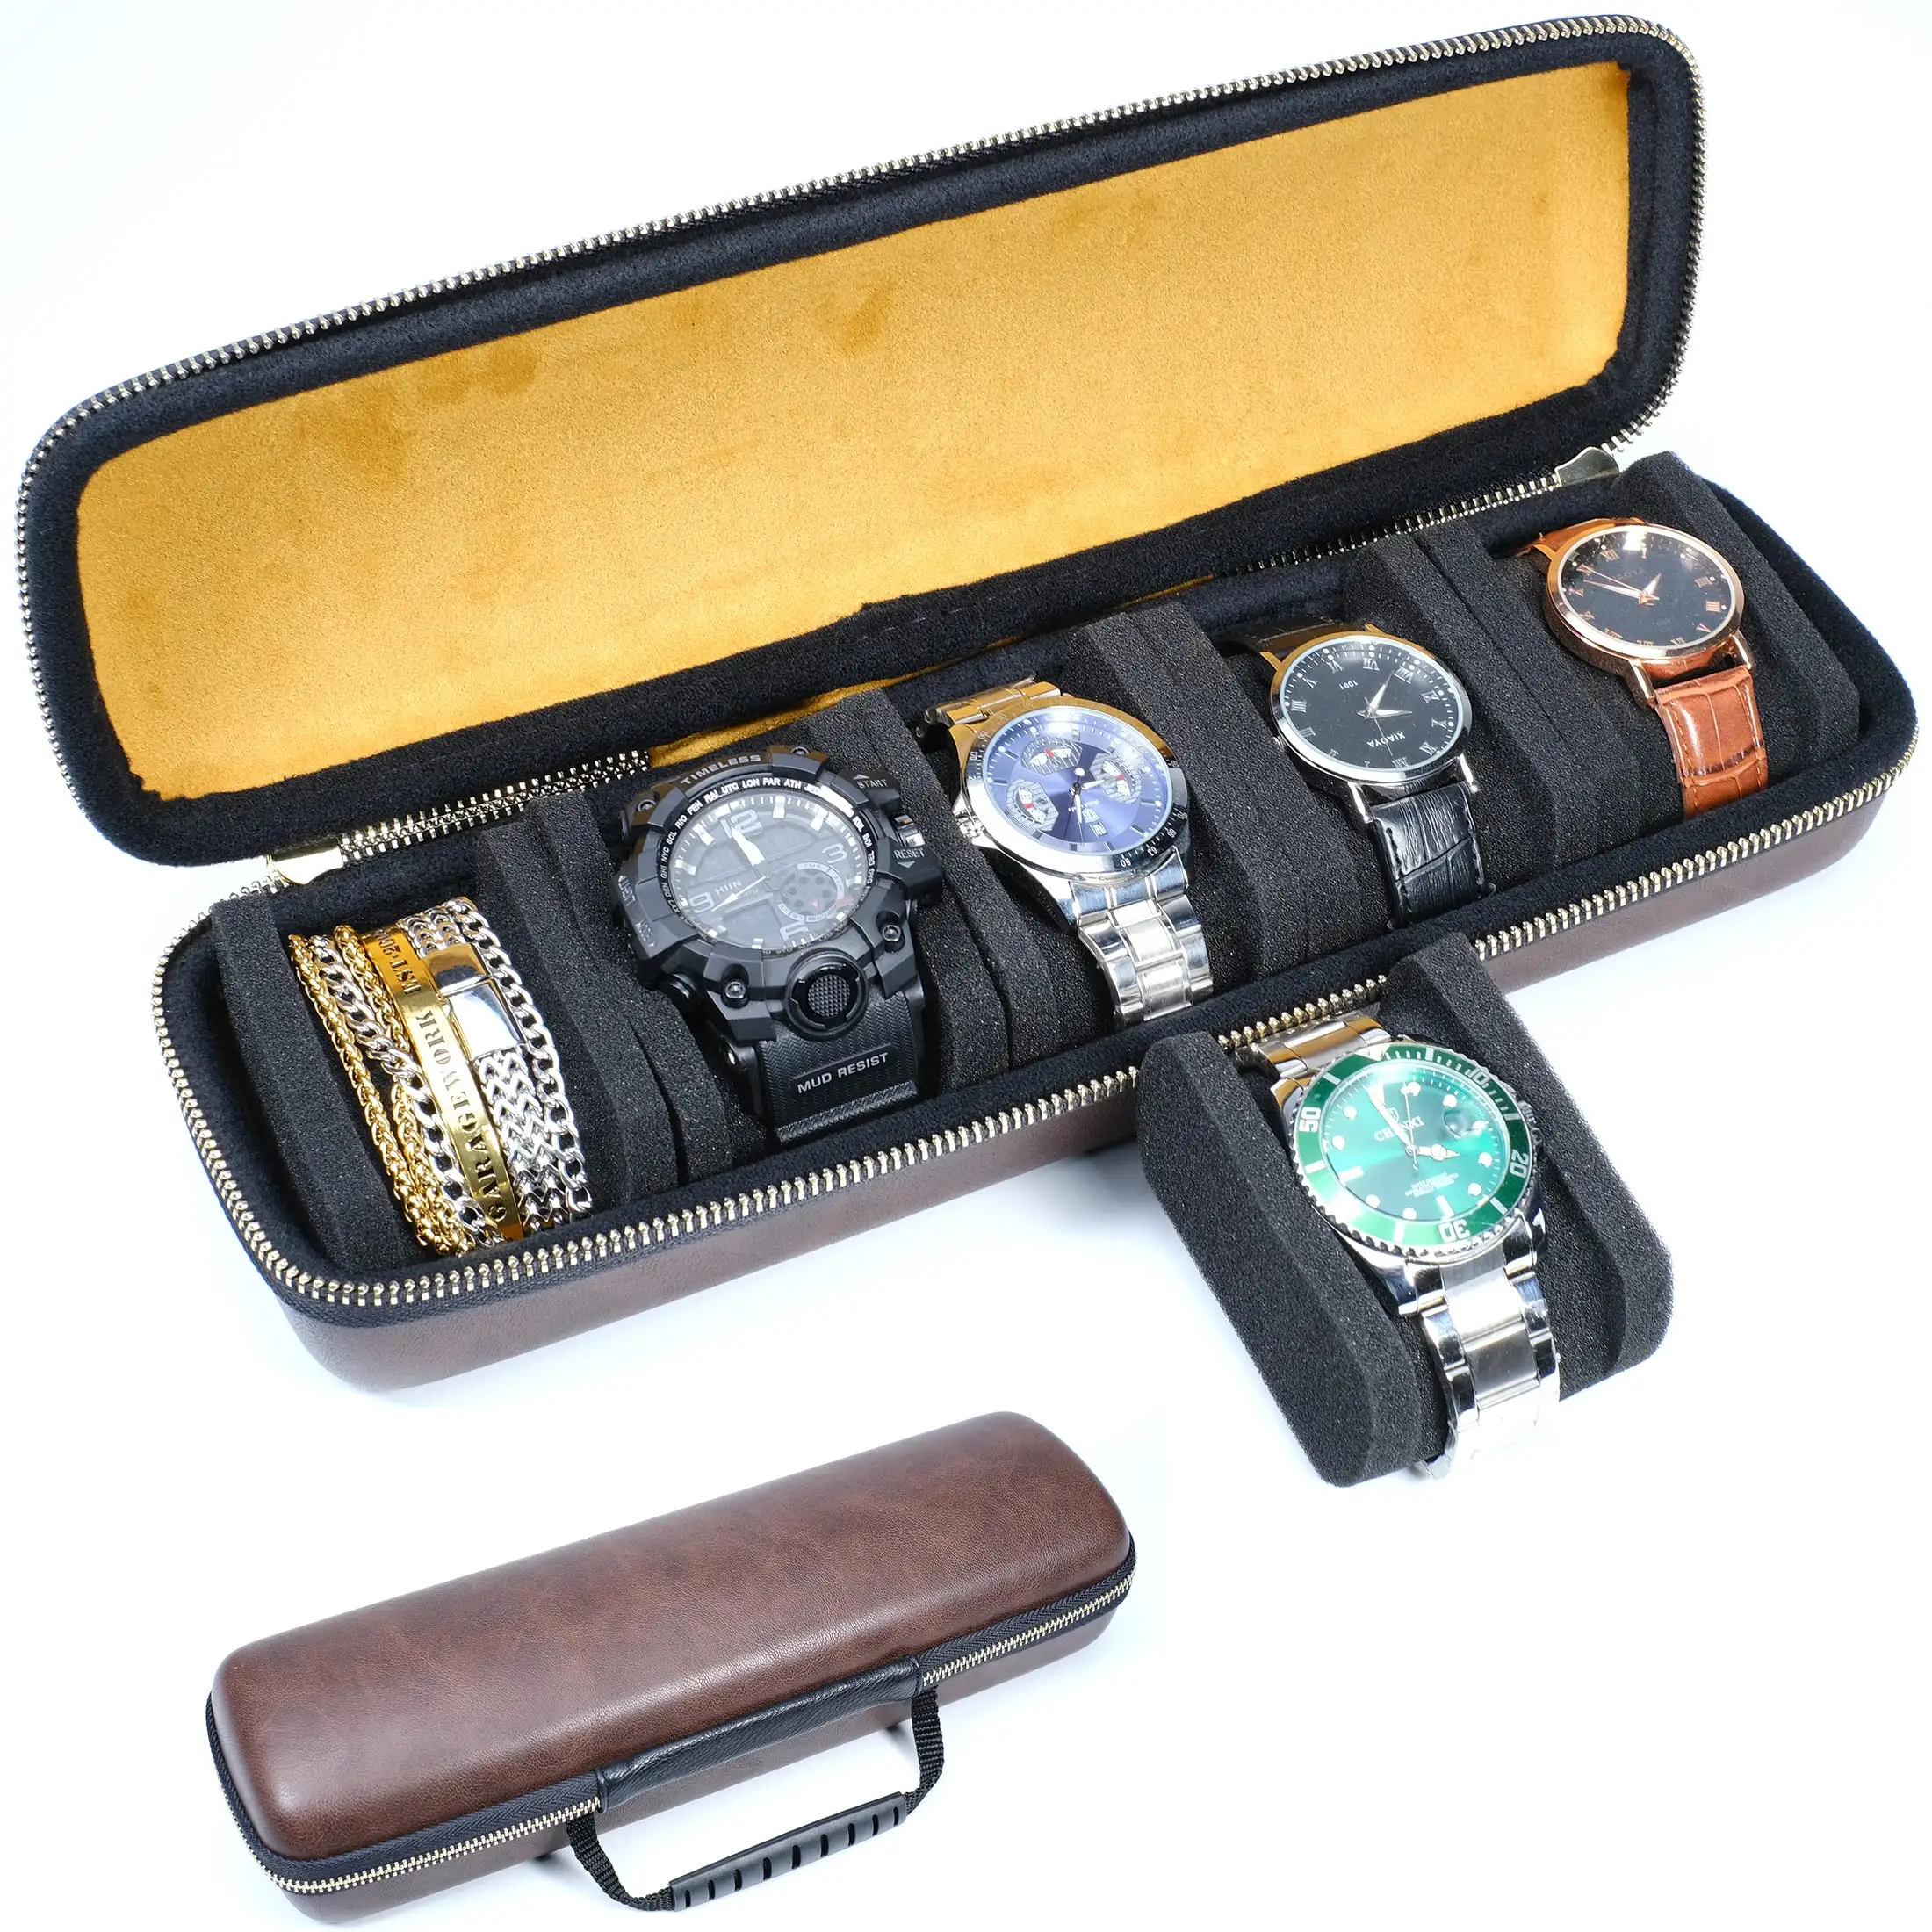 Hard Watch Travel Case 5slot Watch Roll Case Storage and Organizer for Men and Women with anti-move watch pillow